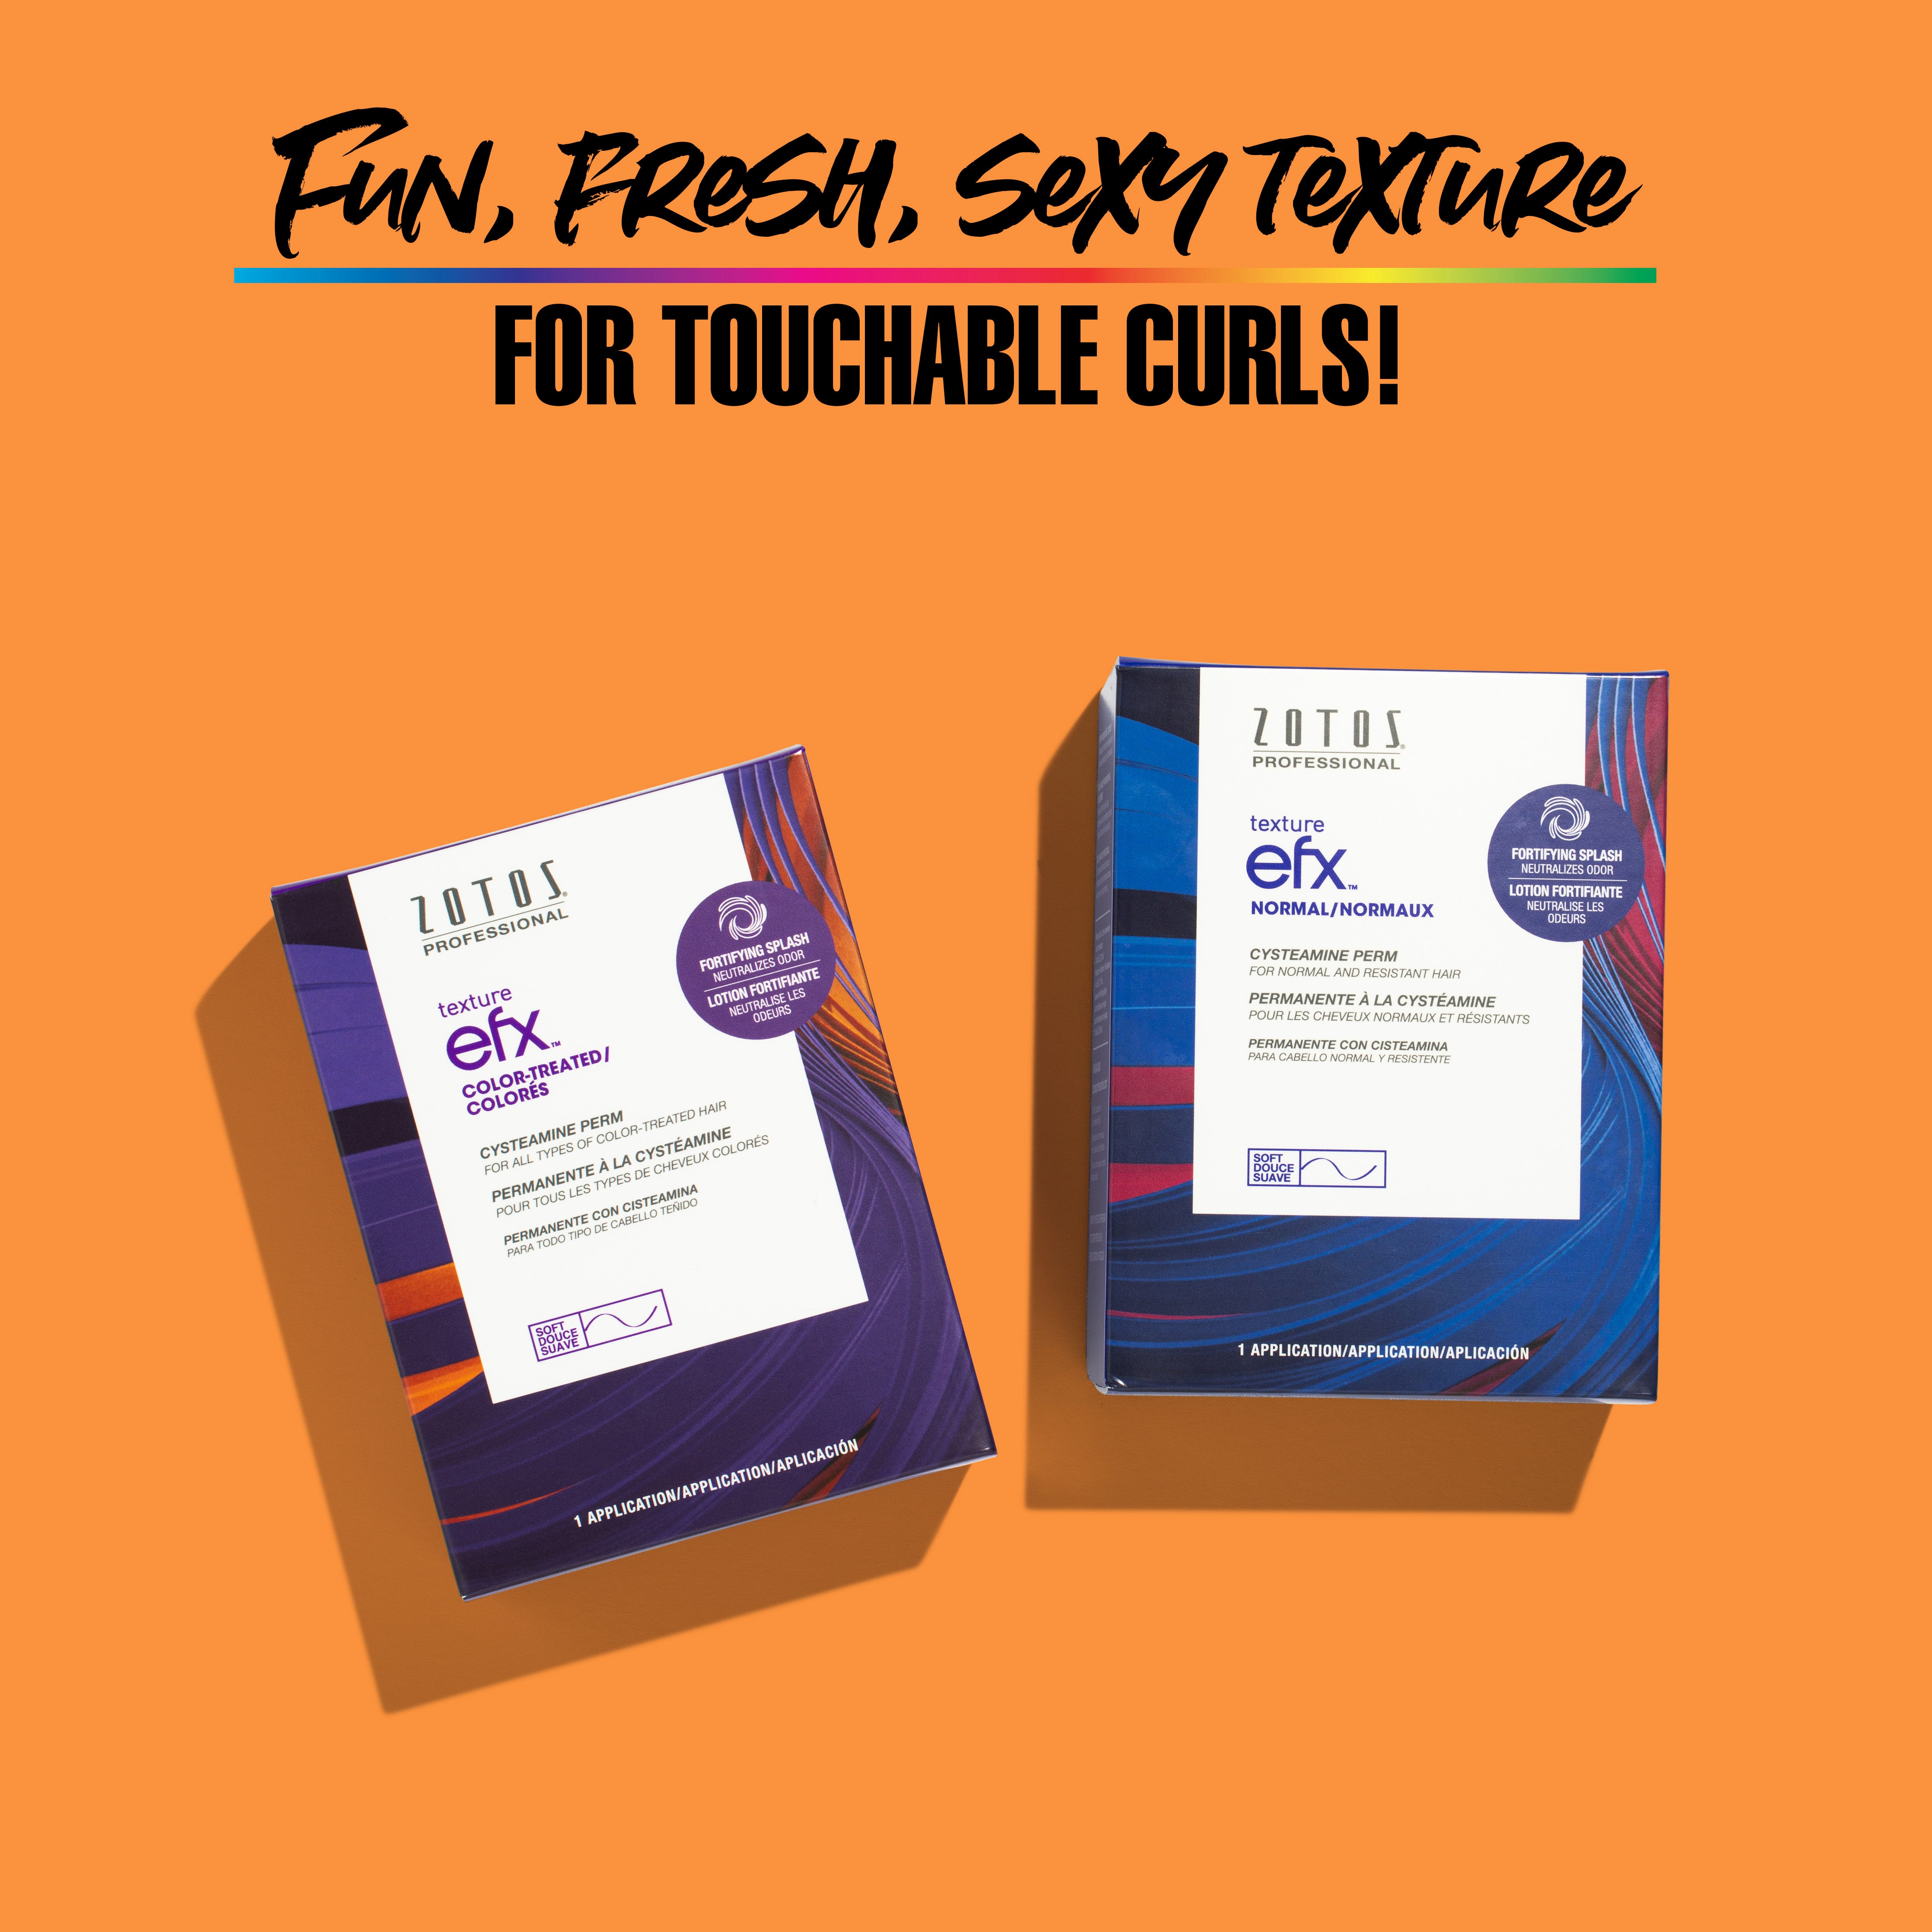 Fun, fresh, sexy texture for touchable curls!